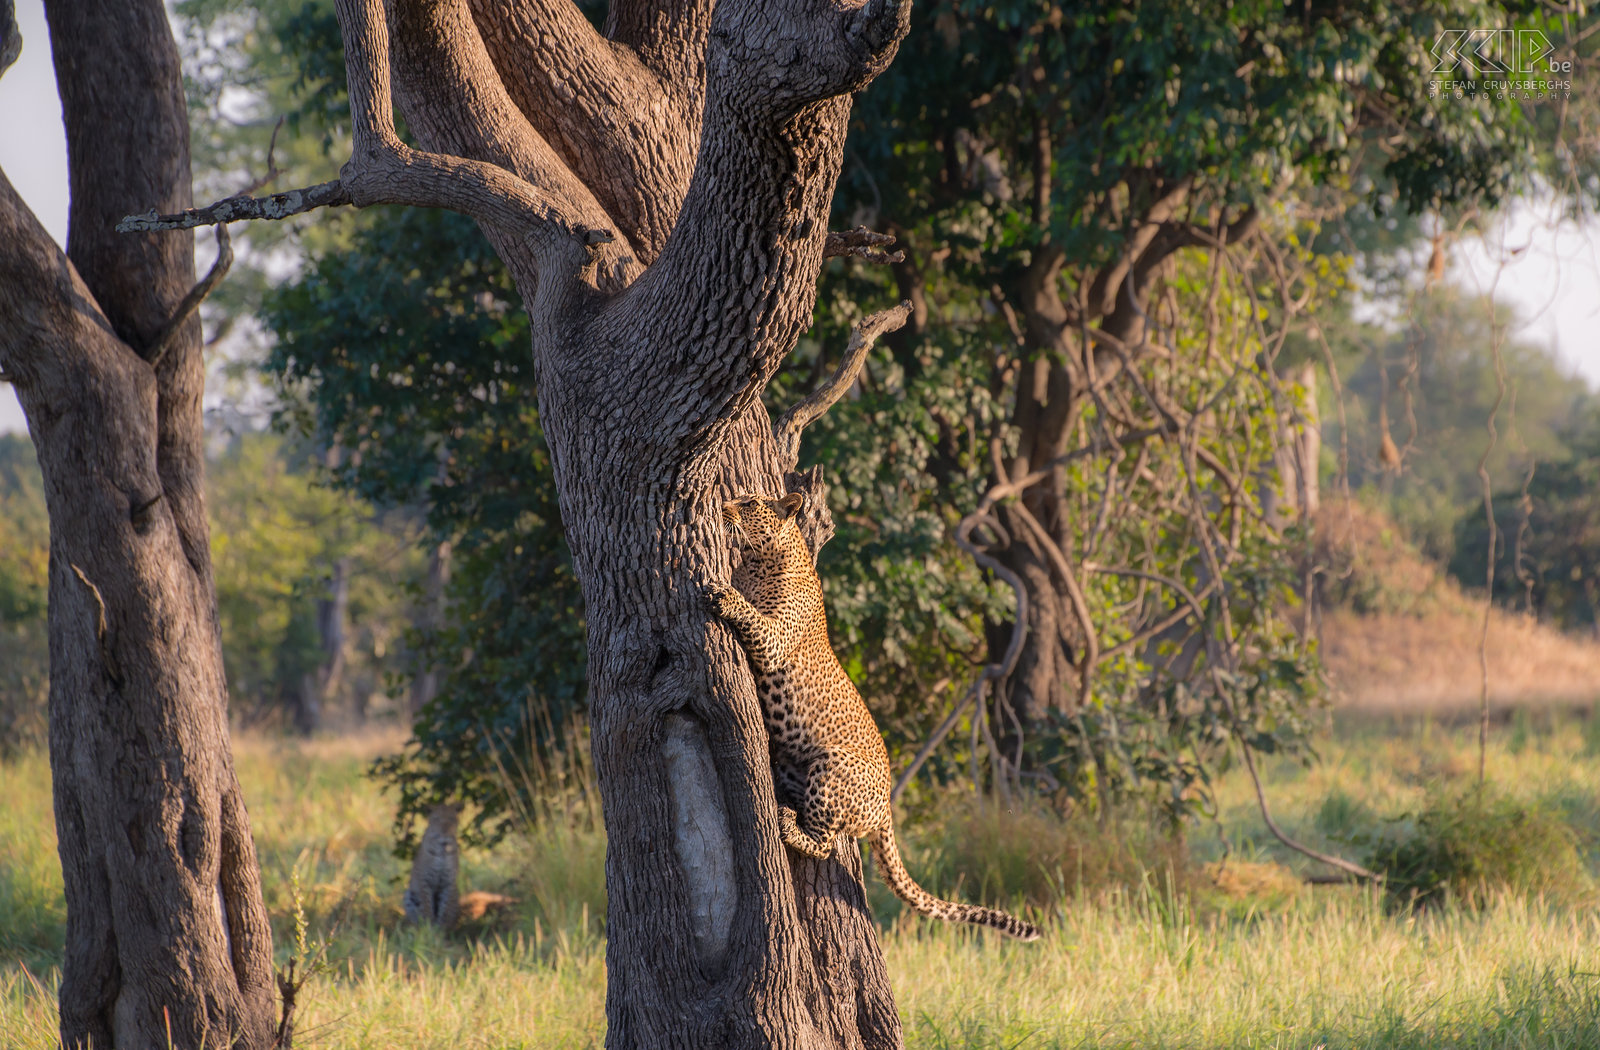 South Luangwa - Leopard in tree With a high jump the leopard climbs easily into the tree. Stefan Cruysberghs